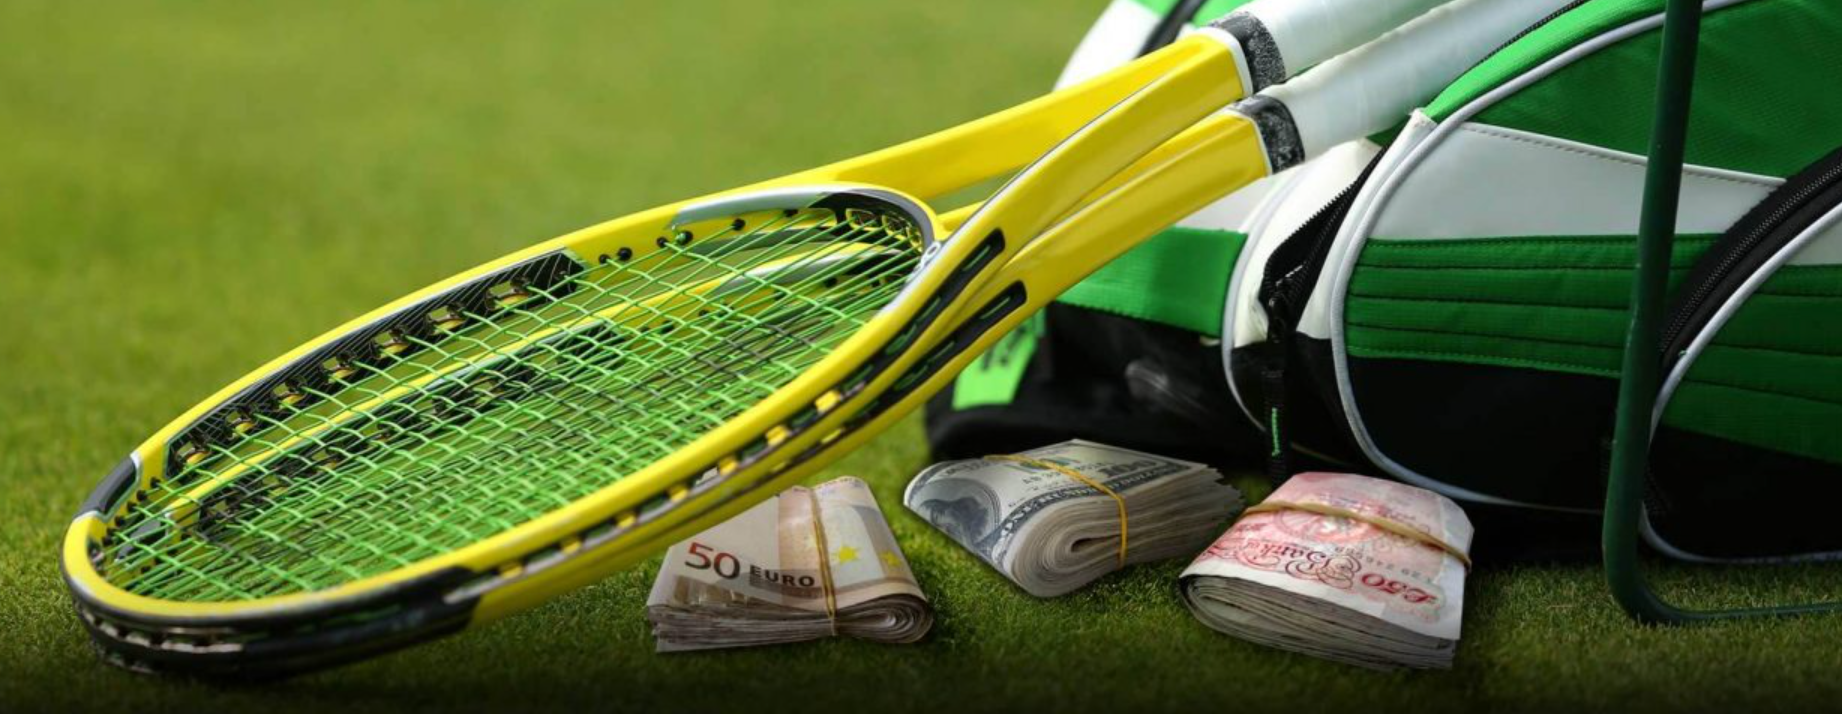 Latest Tennis Betting Online Promotions on Fun88